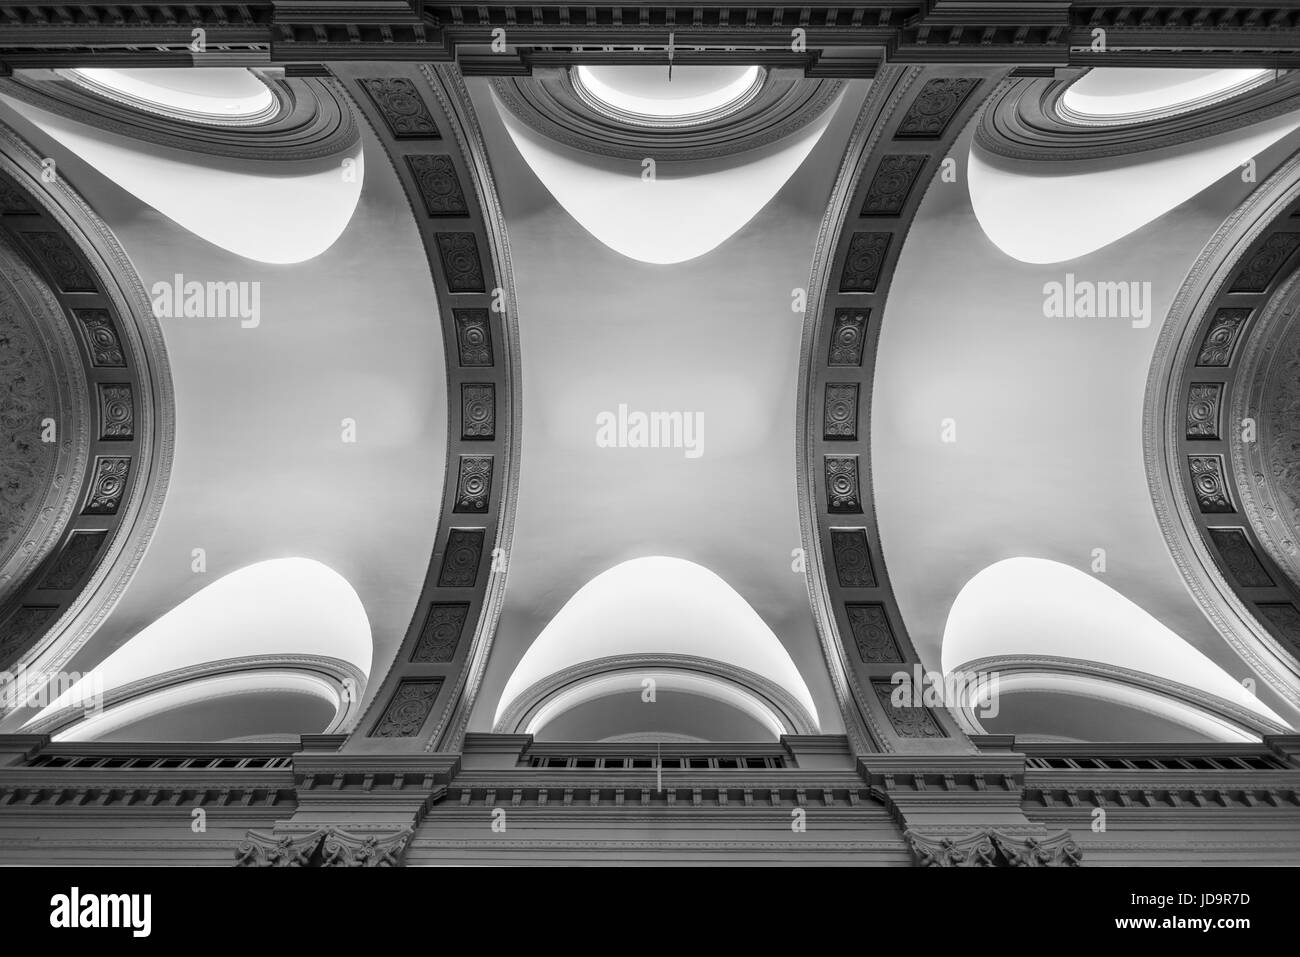 Abstract ceiling detail with curved sections and shapes, low angle view. 2016 urban city United States of America Stock Photo